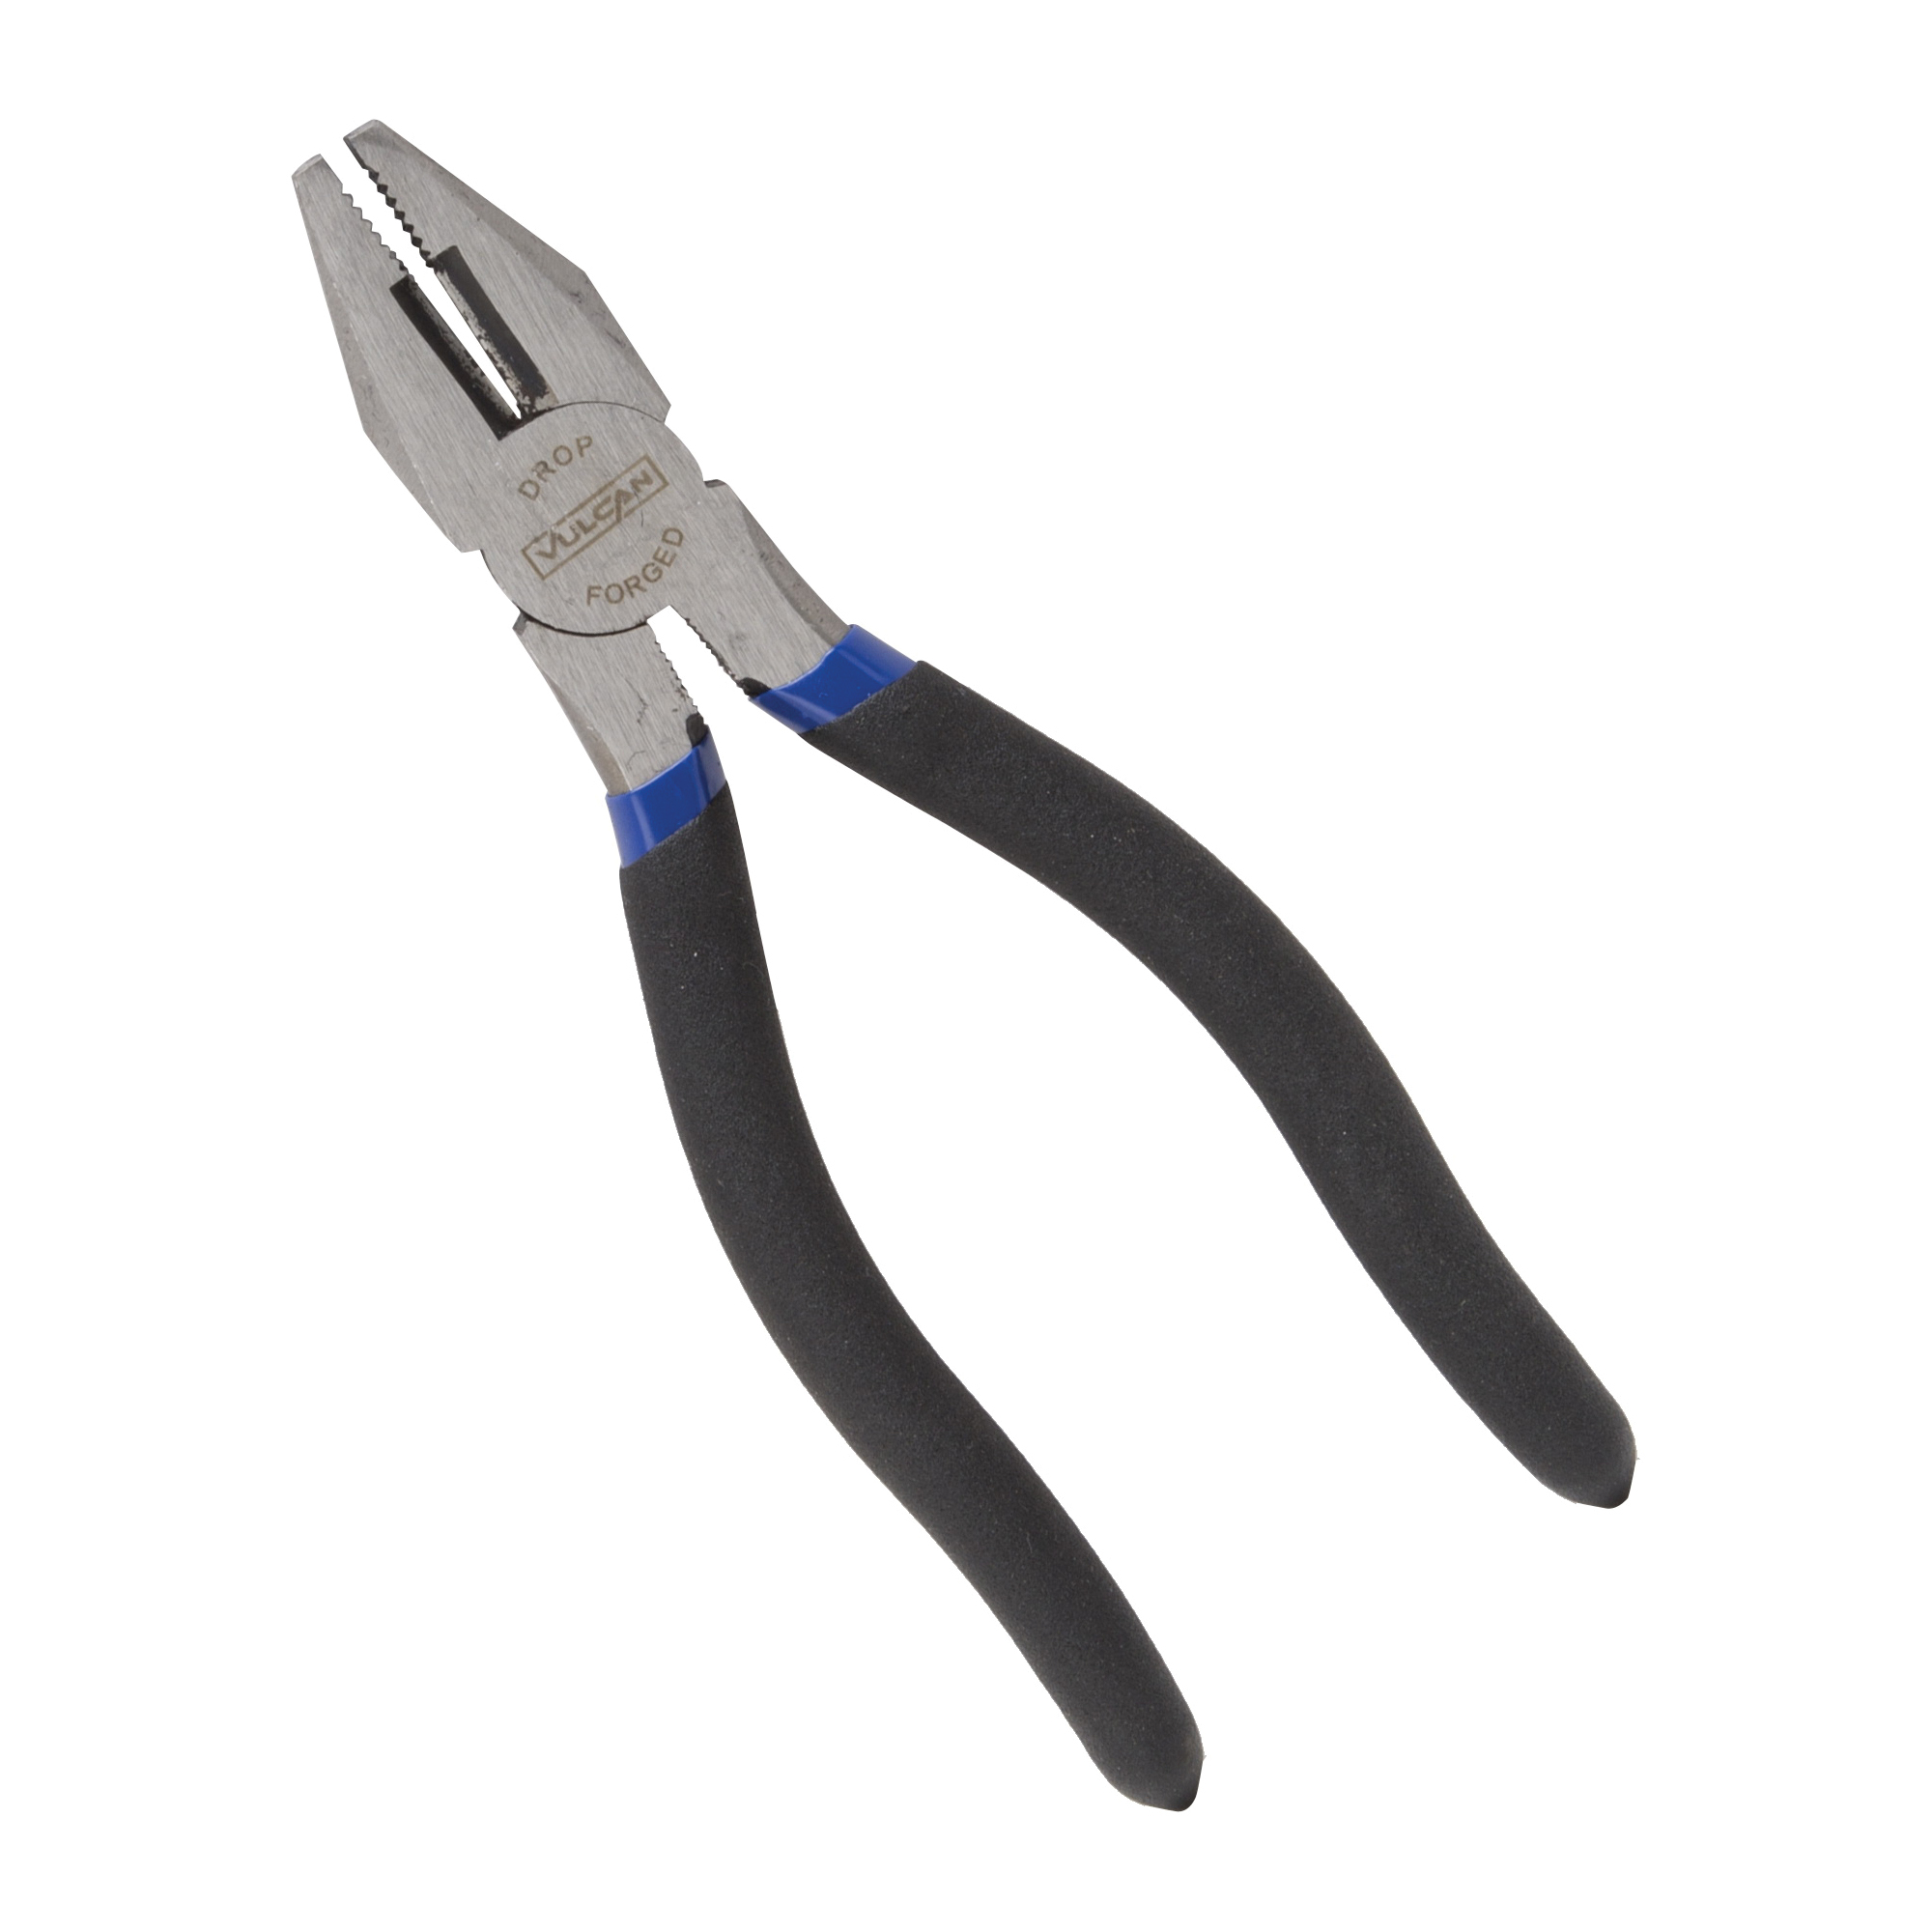 PC918-11 Linesman Plier, 7 in OAL, 1.2 mm Cutting Capacity, 1-1/4 in Jaw Opening, Black/Blue Handle, 1 in W Jaw